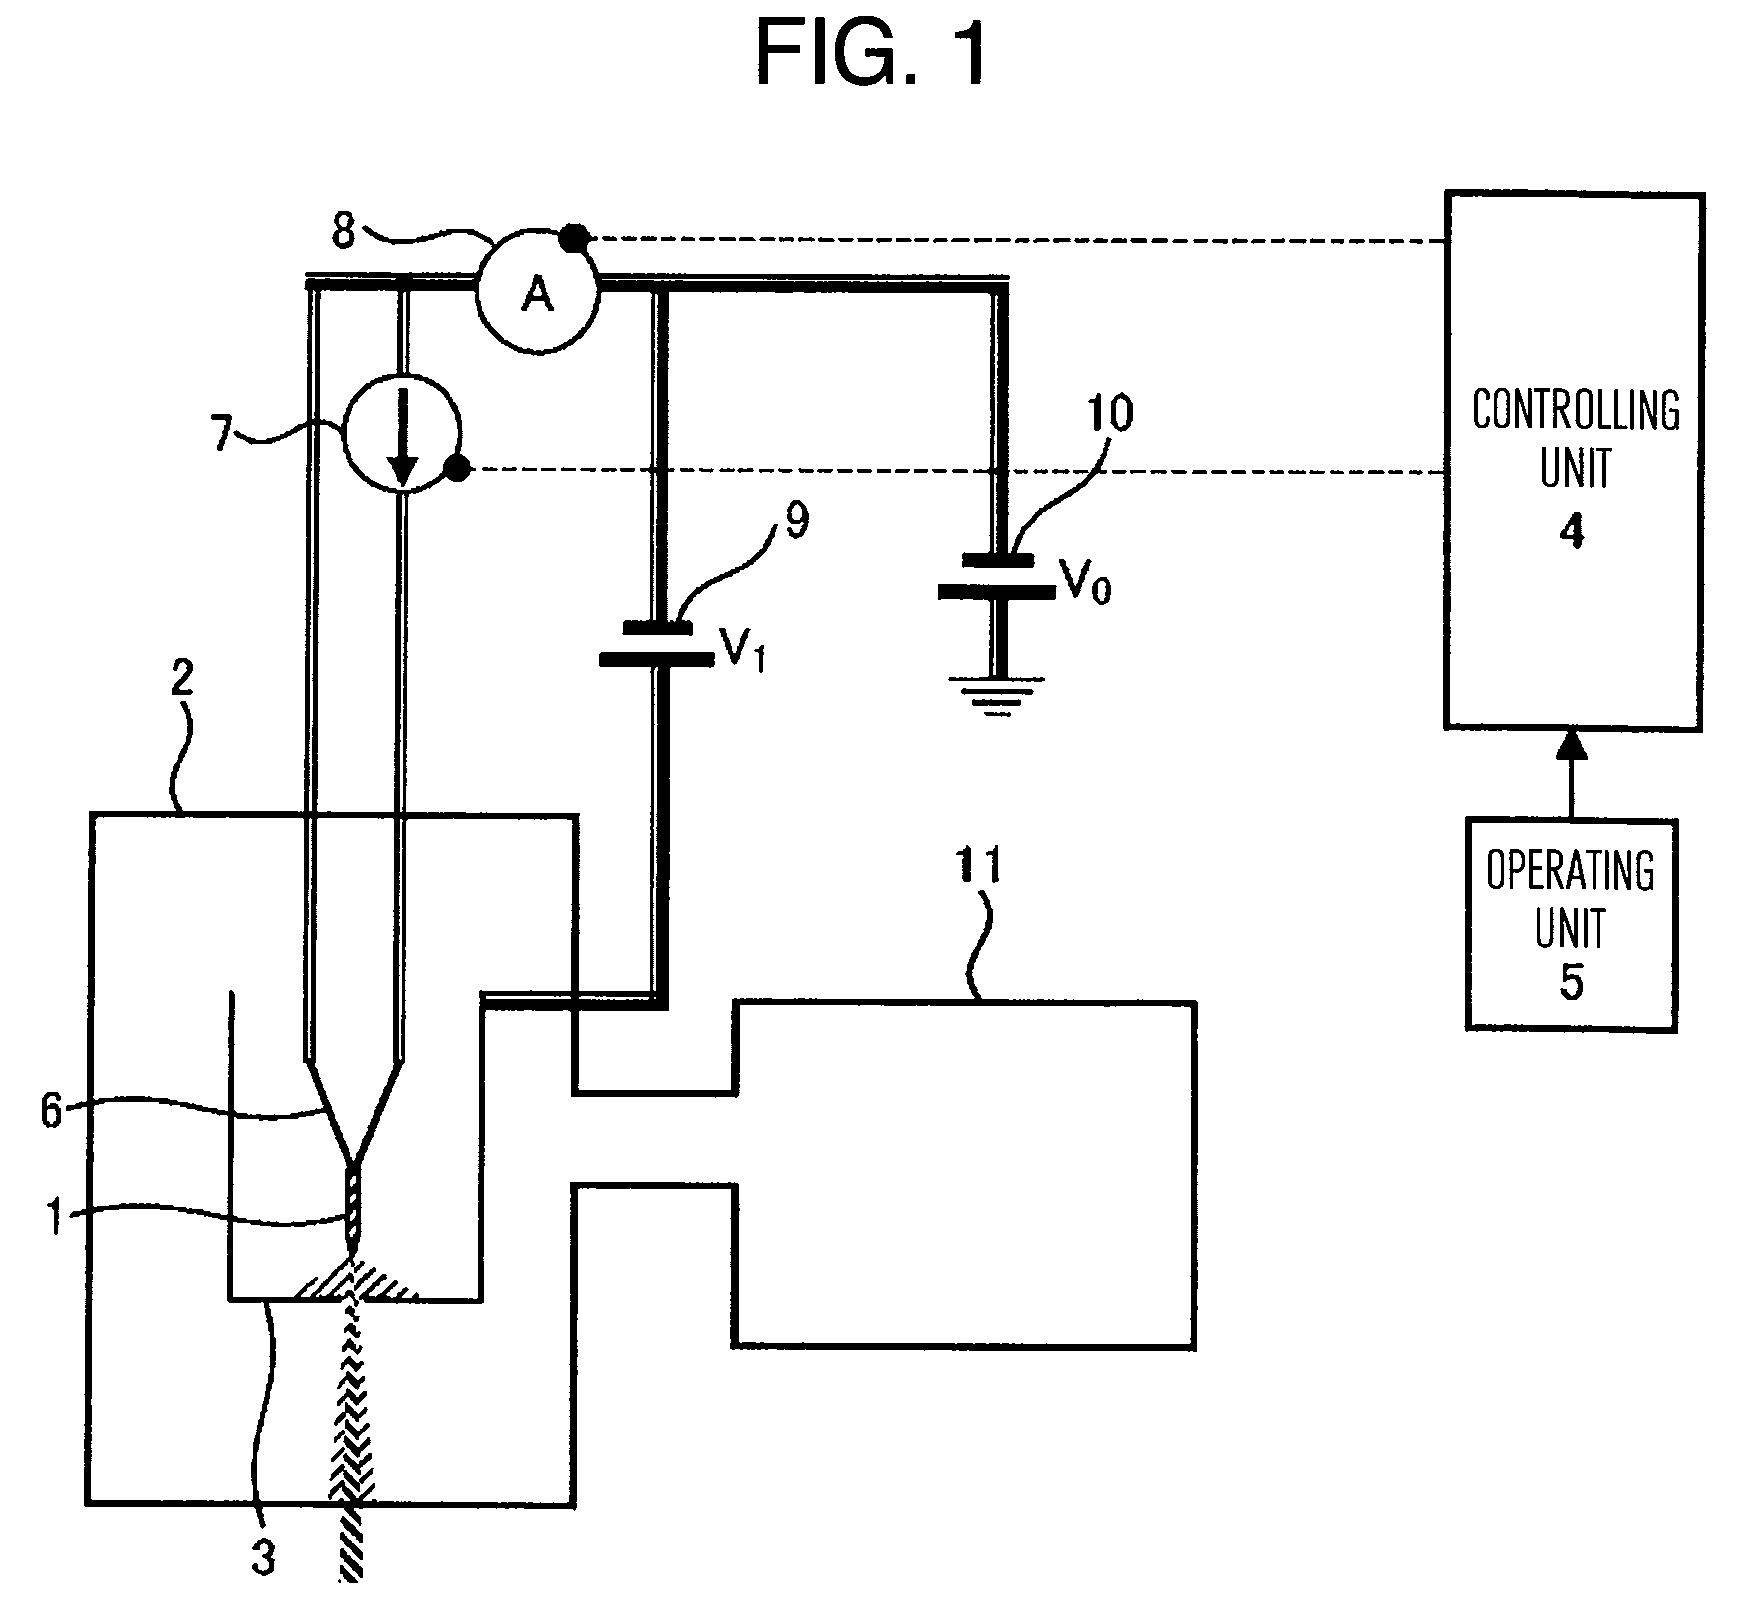 Field-emission electron gun and method for controlling same